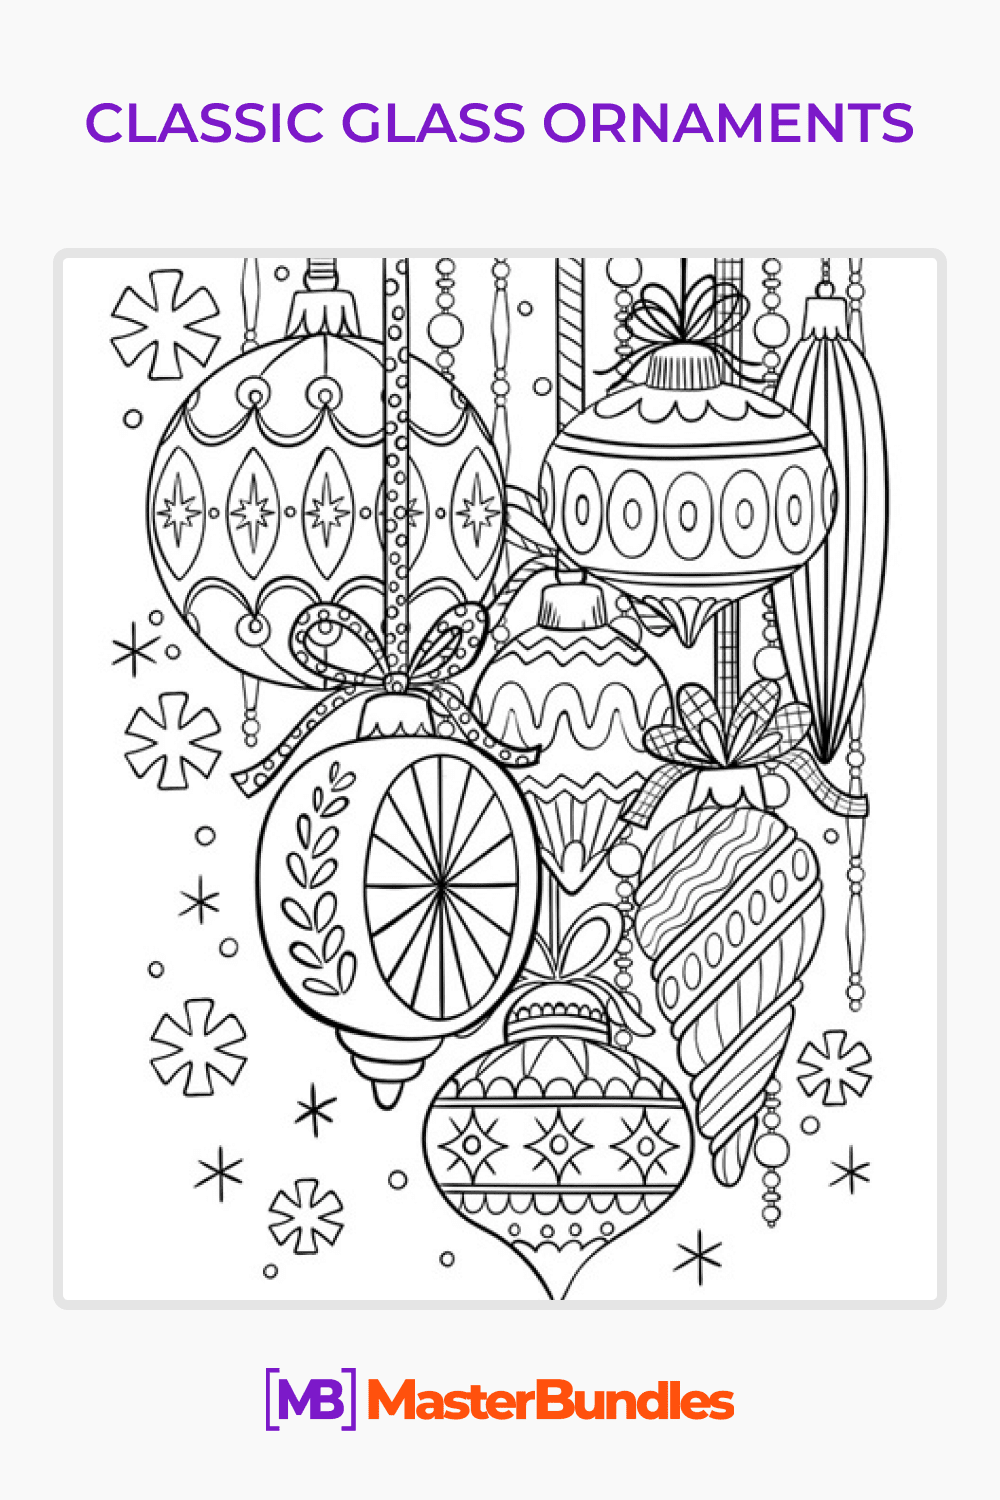 Classic glass ornaments coloring page pinterest image.